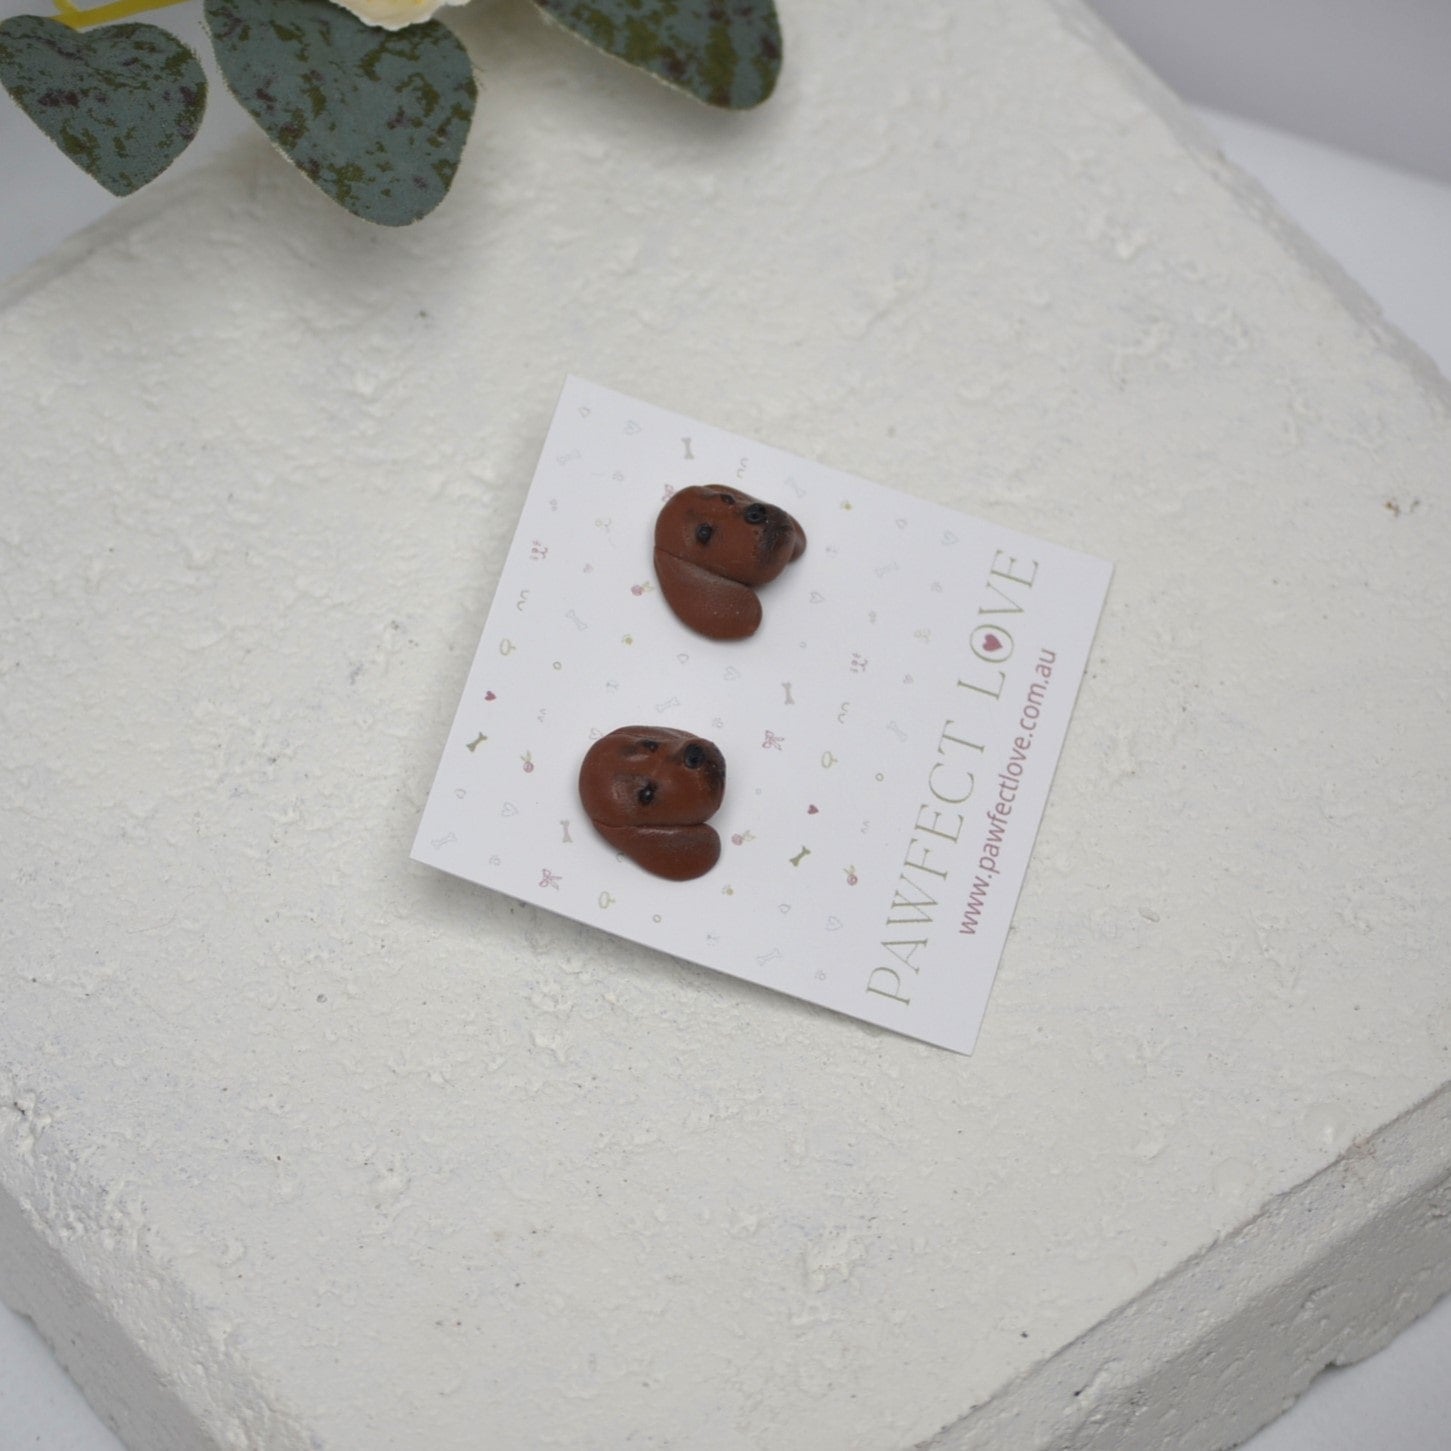 Handmade dachshund stud earrings by Pawfect Love, positioned on white paver